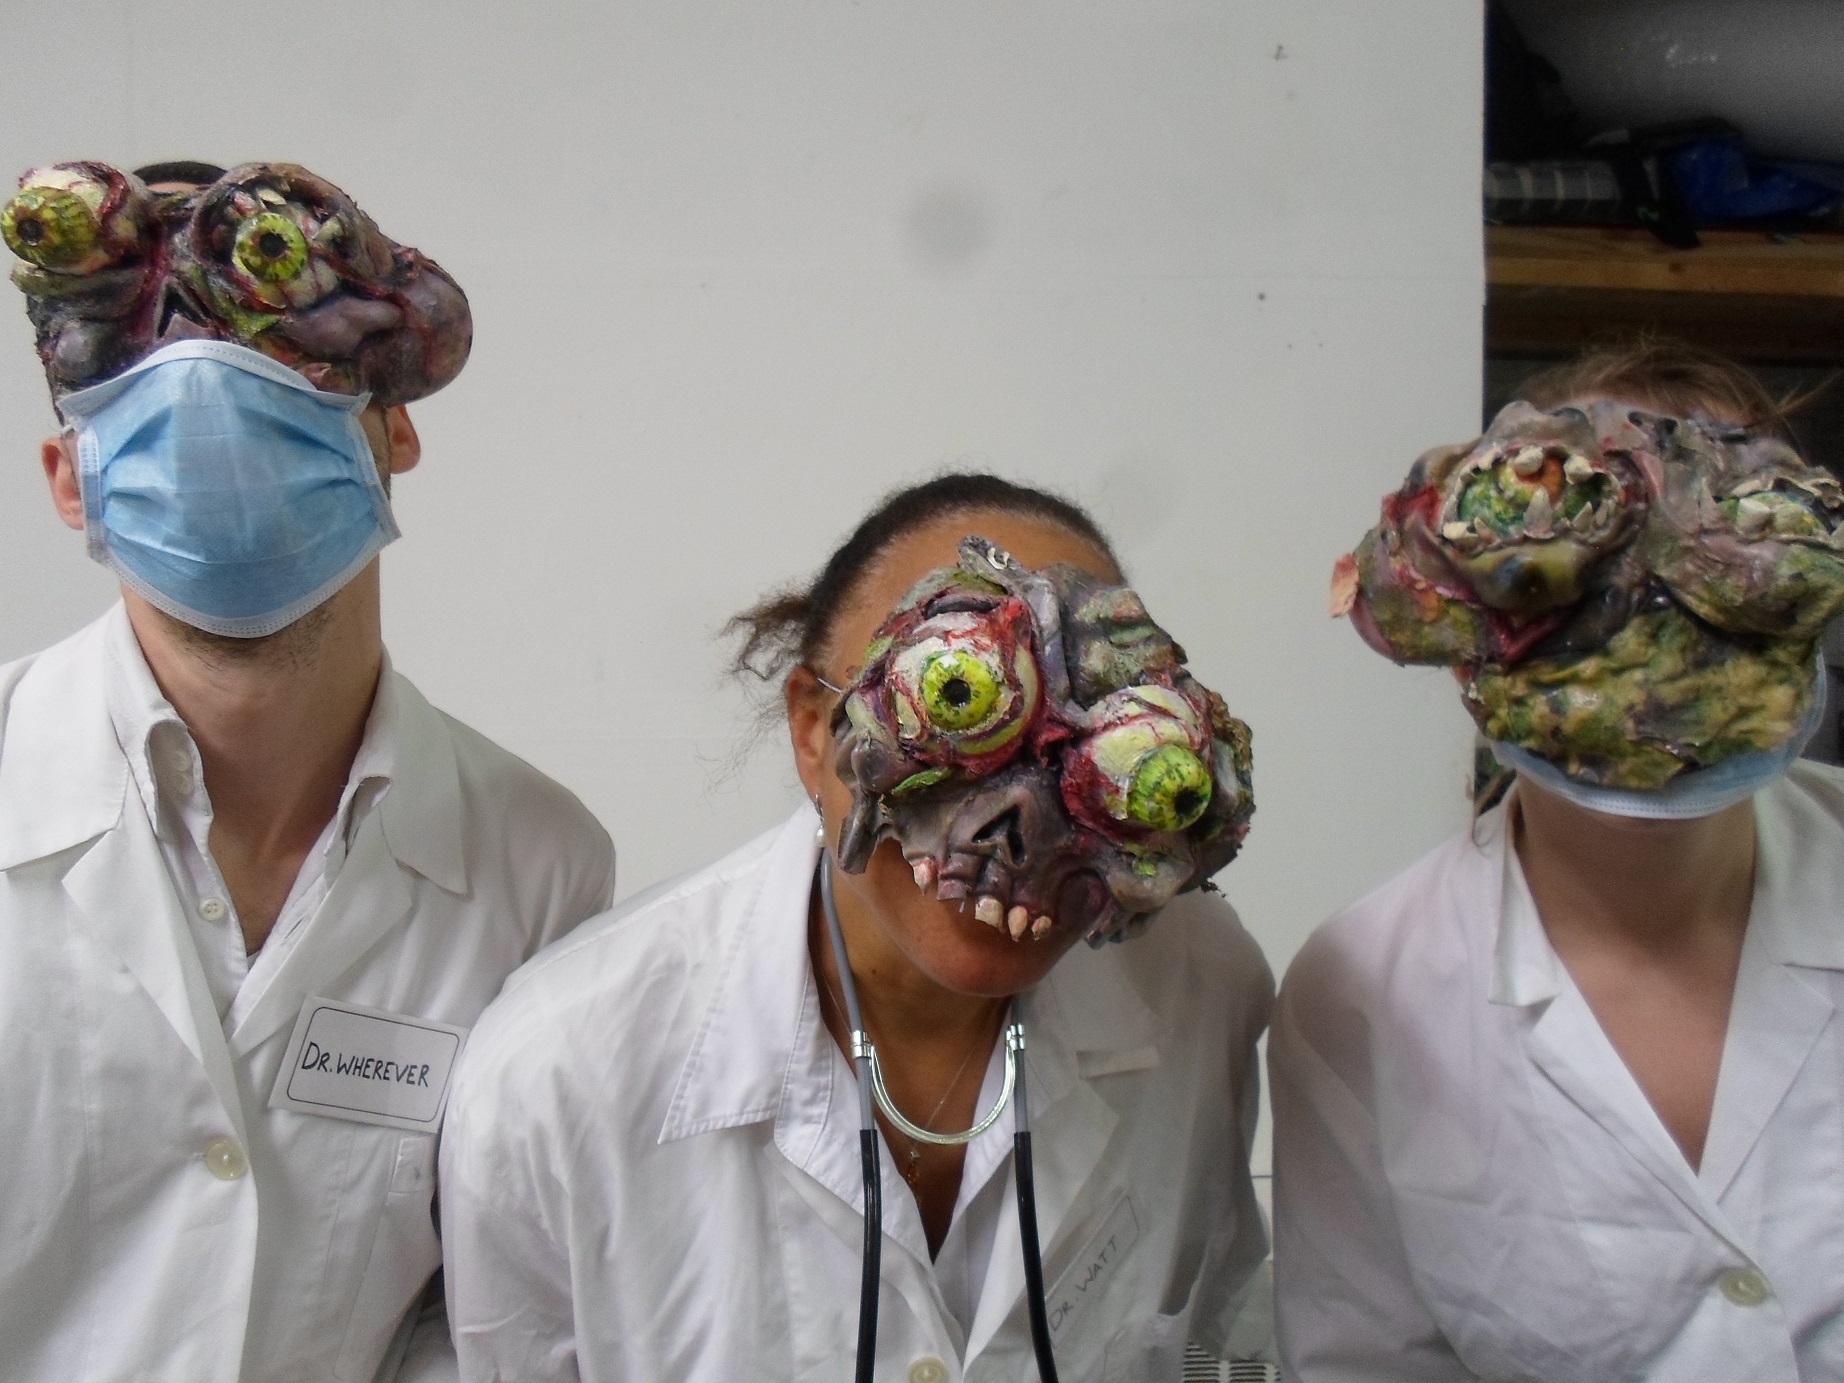 Three people in white coats and face masks lean towards the camera, each wears grotesque prosthetic eyes 